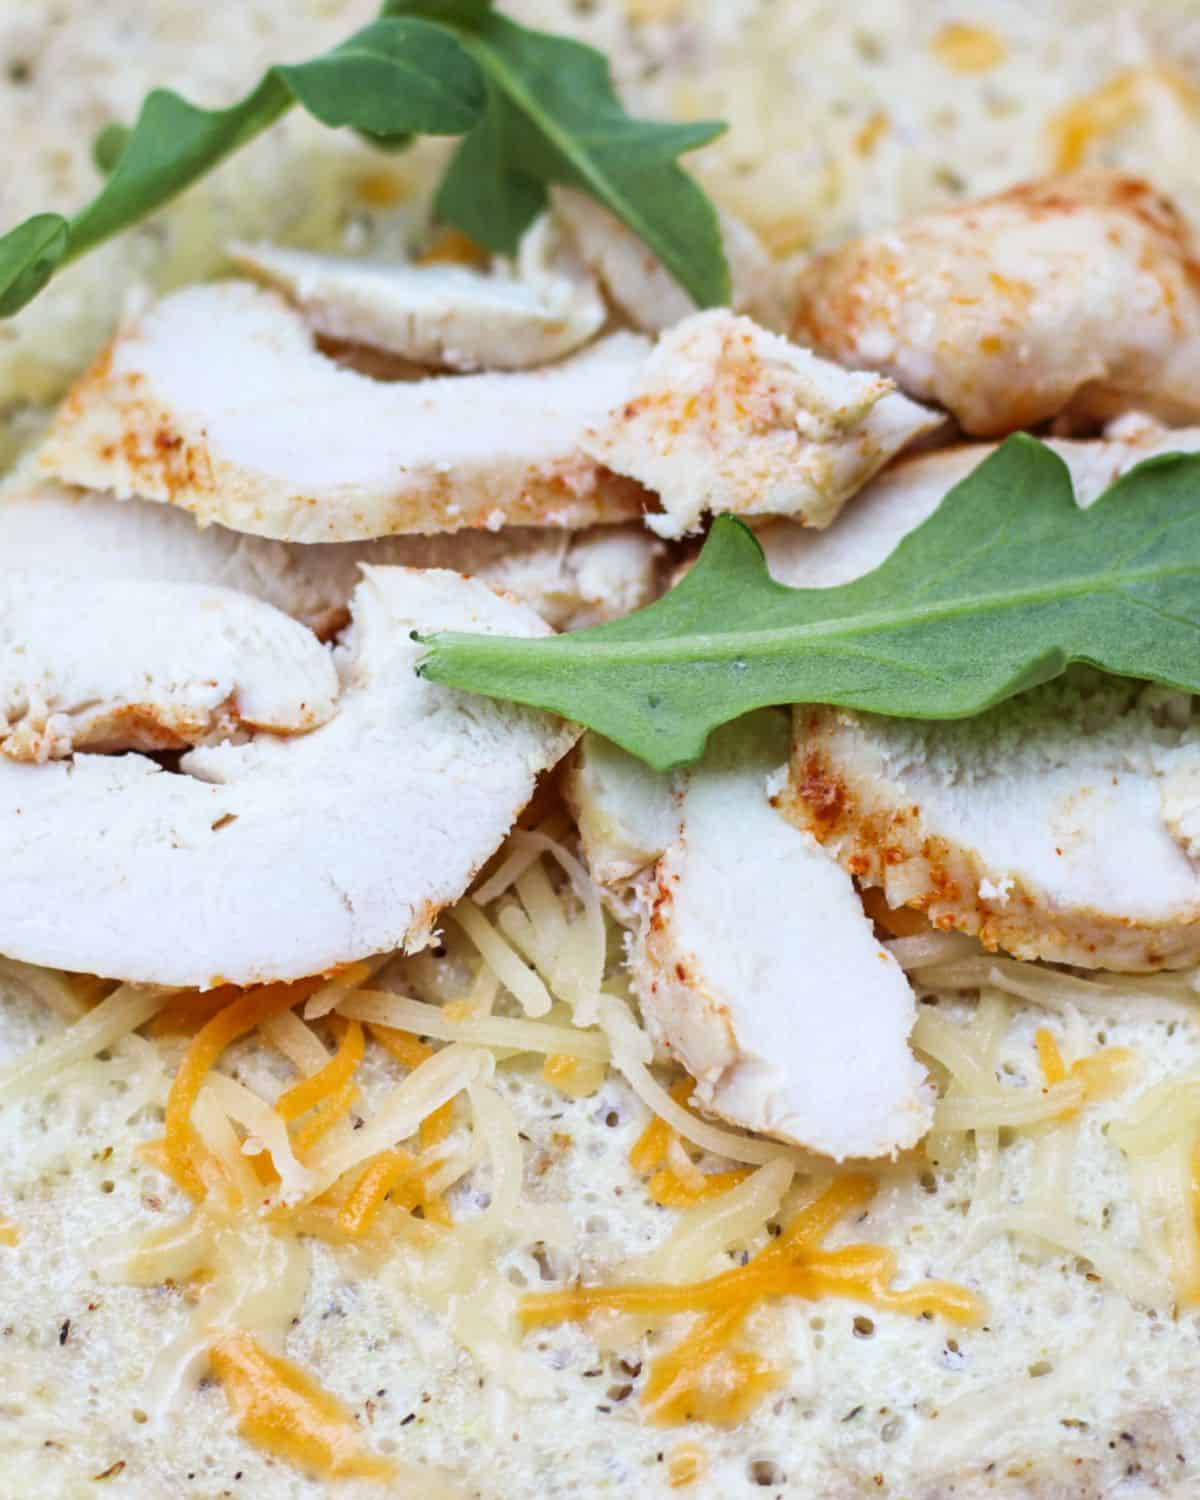 Sliced cooked chicken breast with cheese and few arugula leaves on top of a flat wrap.